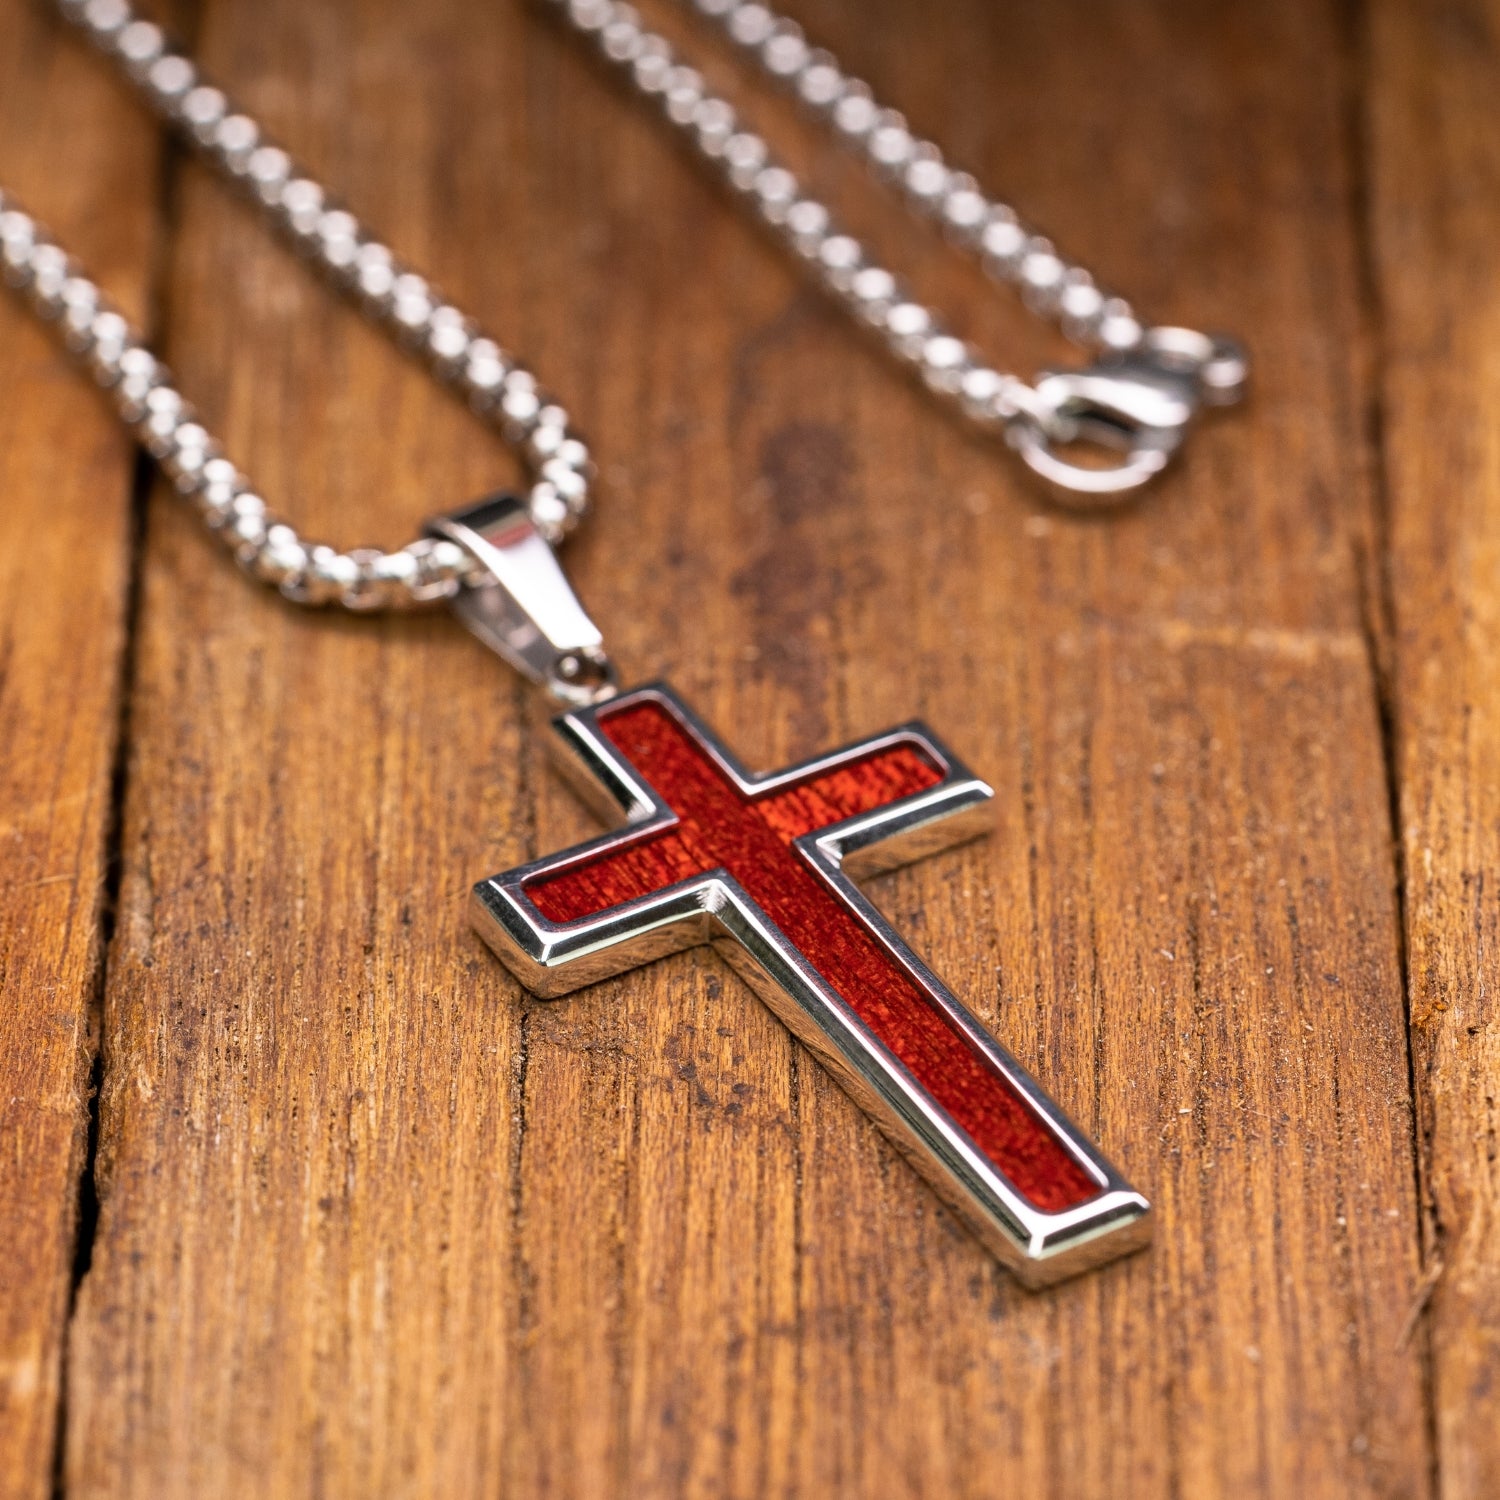 Vintage Tarnished Sterling Silver Holy Cross Necklace - Yourgreatfinds